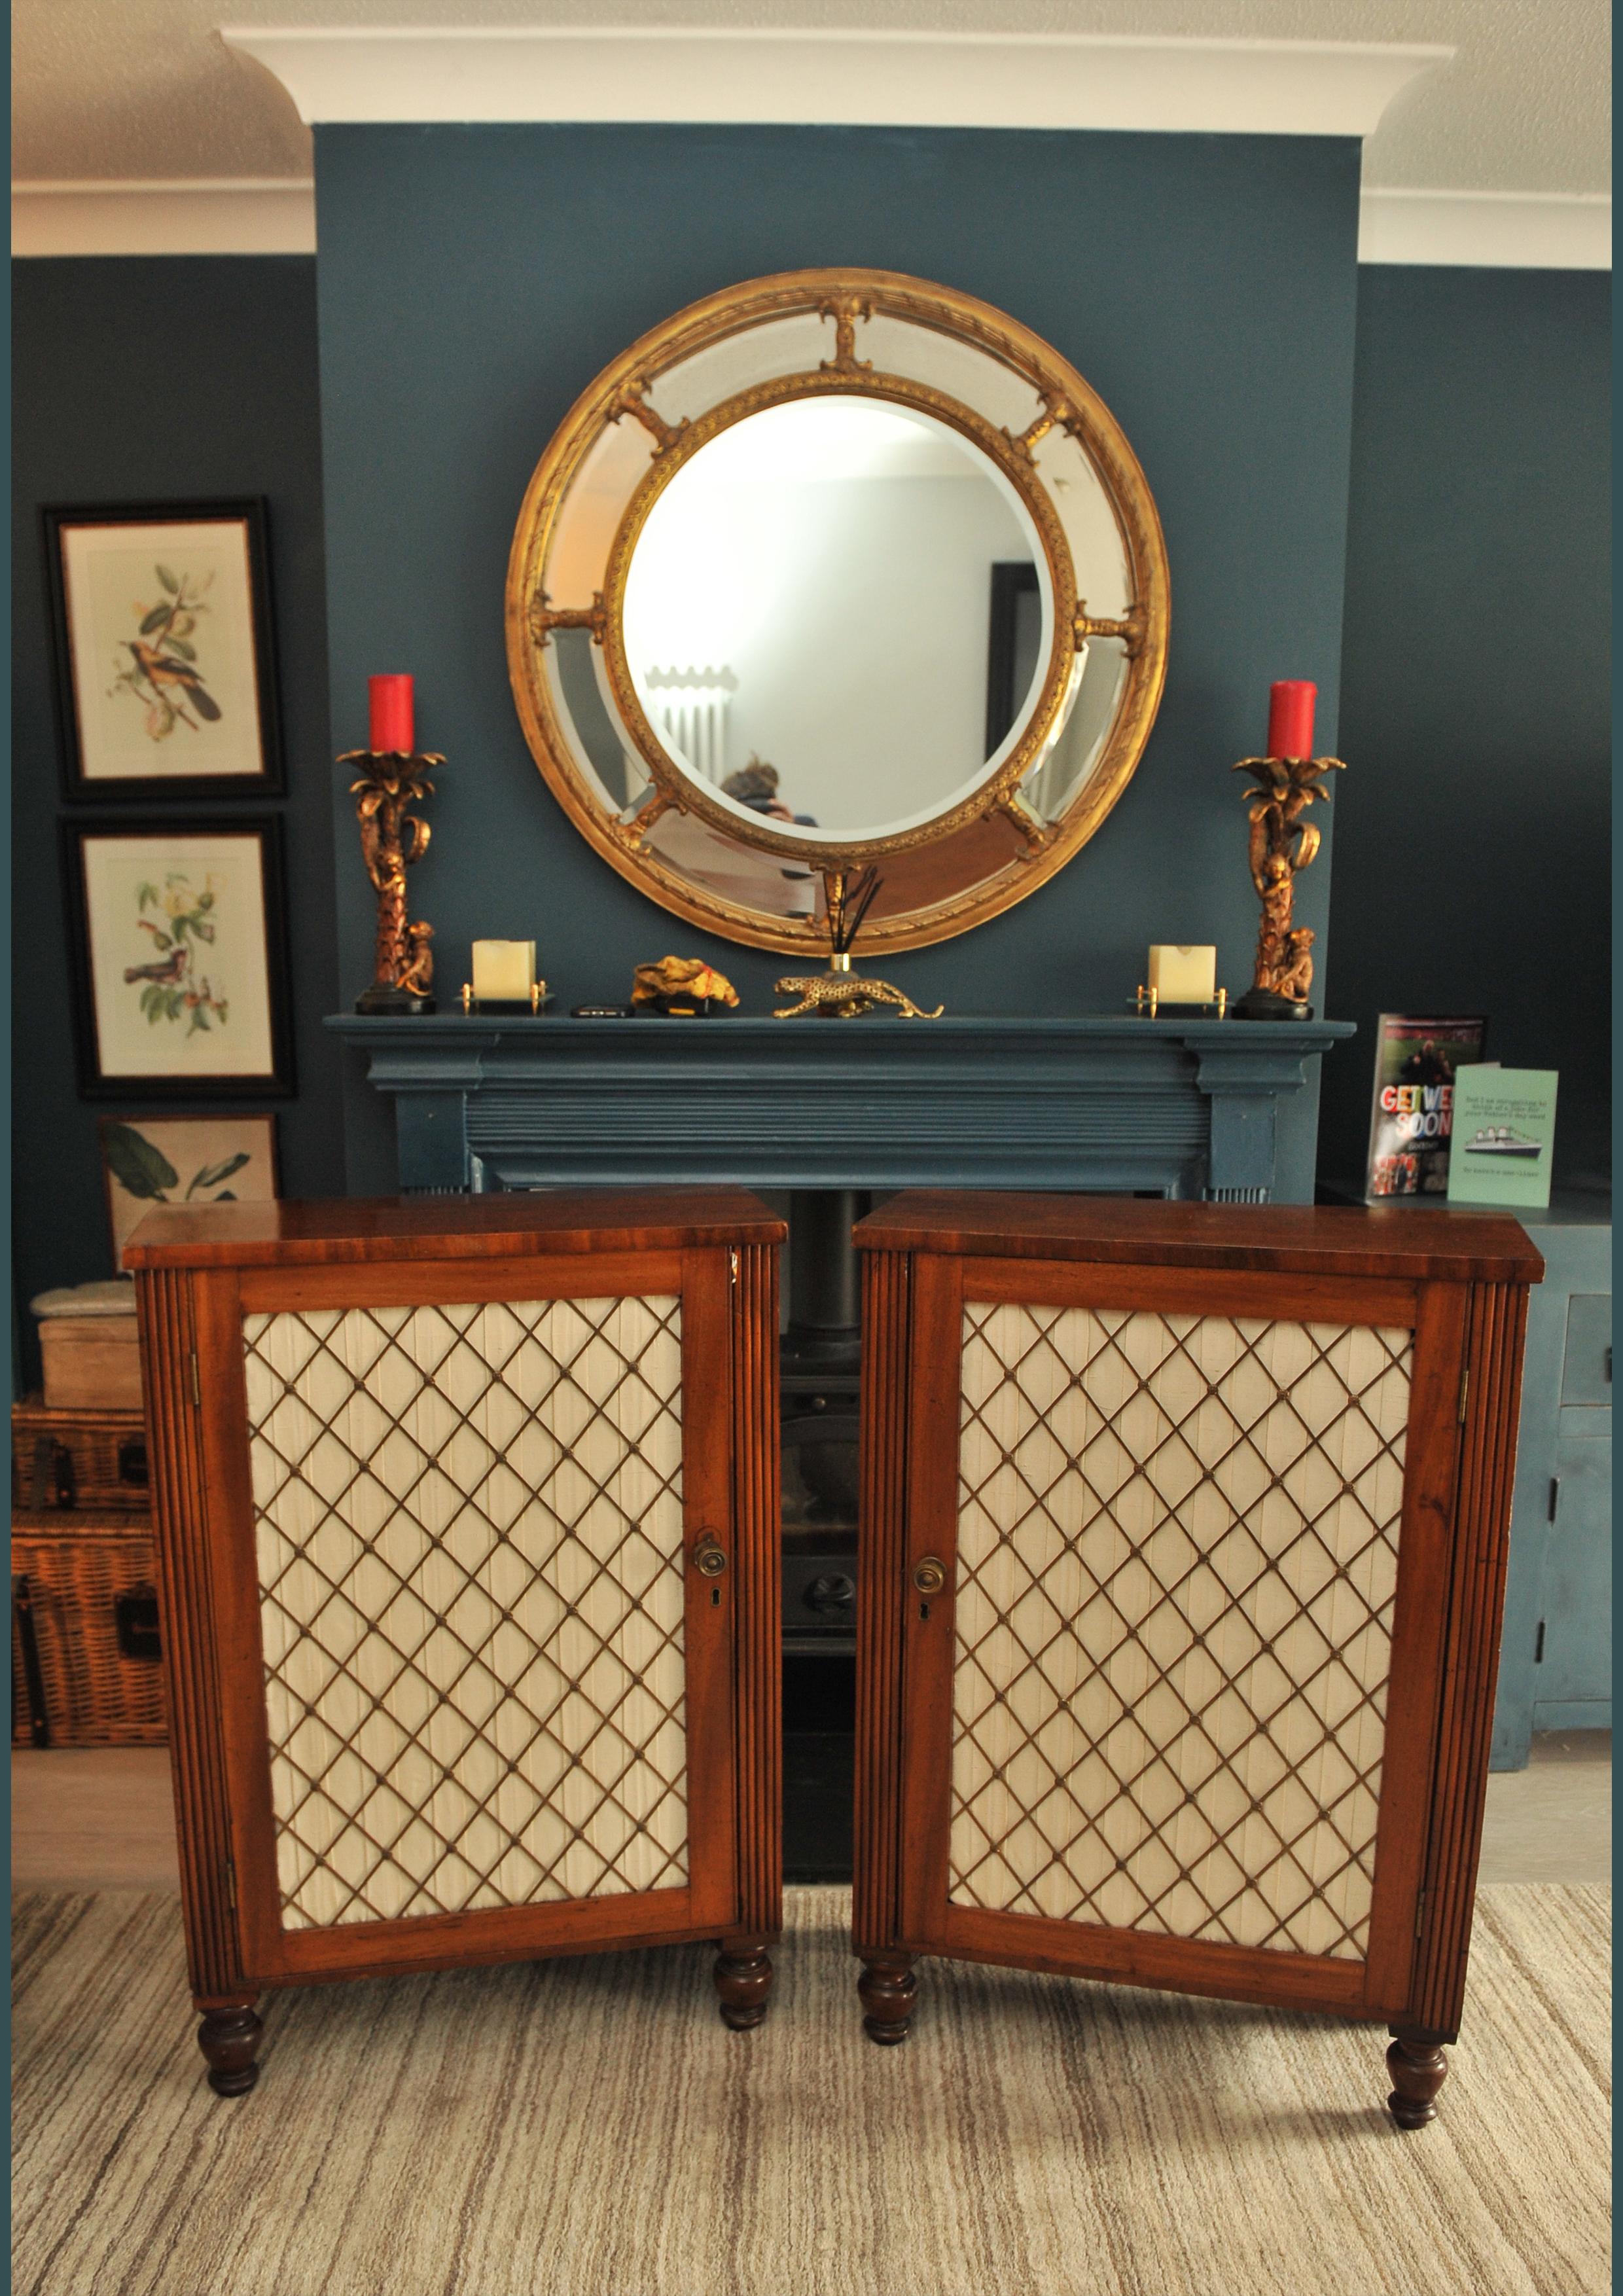 Rare Pair of Exquisite Regency Period Mahogany Side Cabinets with Decorative Brass Lattice Fronts

Internal measurements 
Depth of shelf 24cm
Internal Cabinet Height 77cm